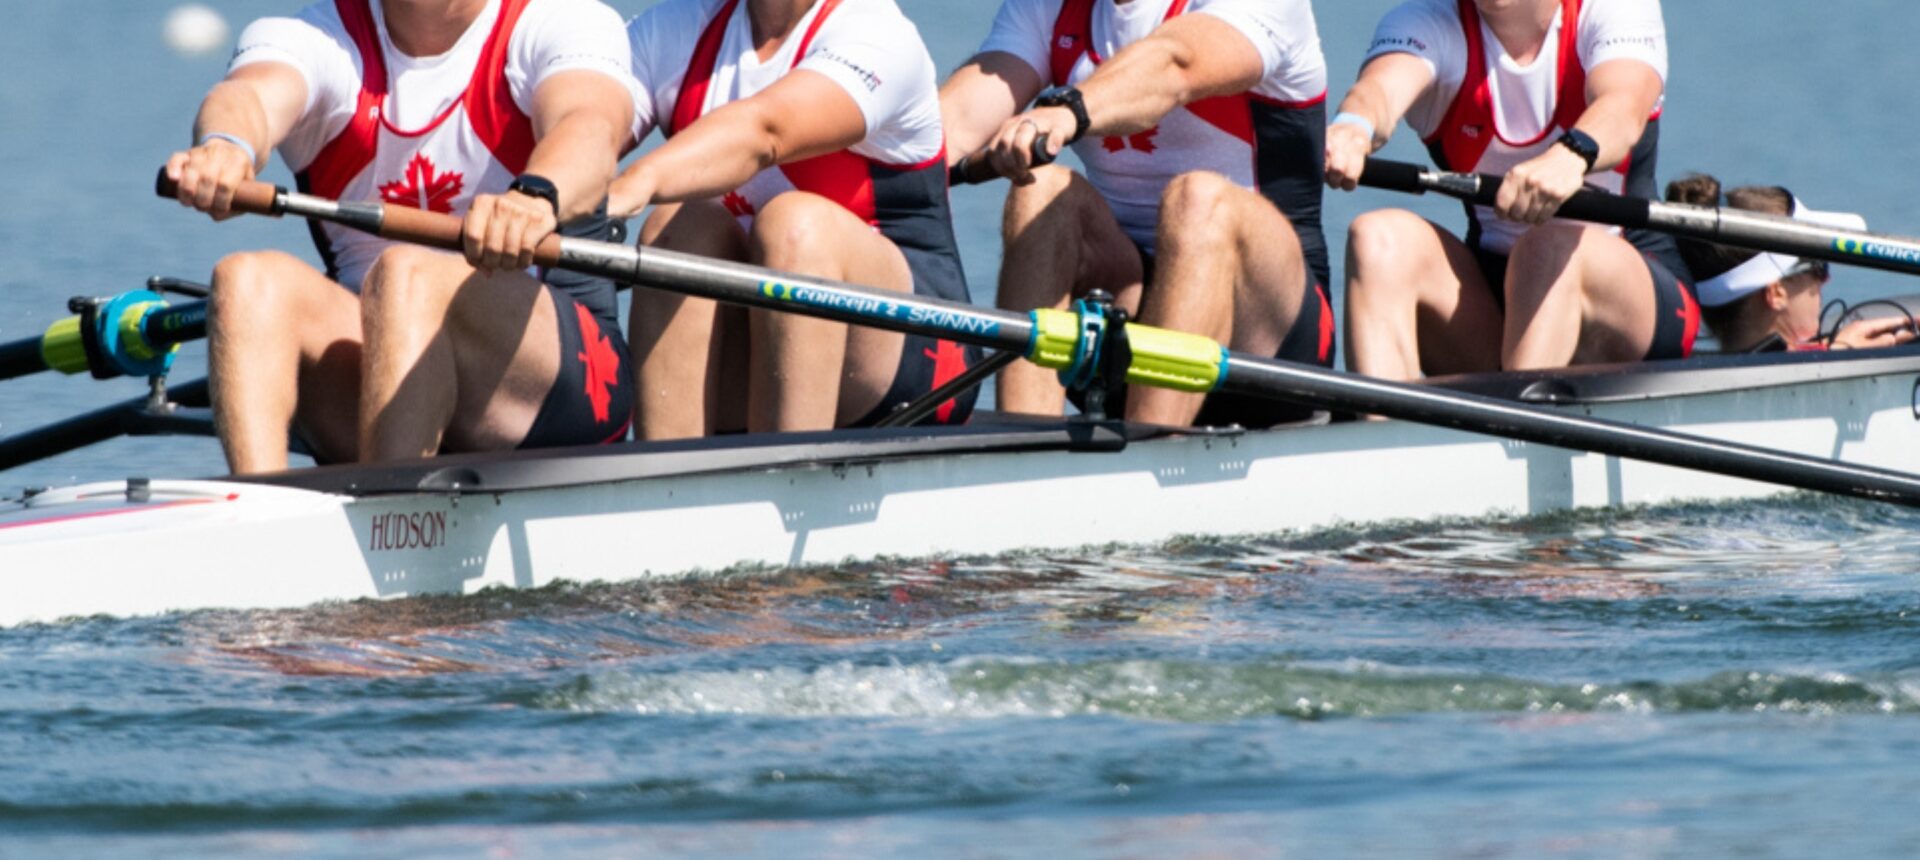 New Para Rowing Lead hire an important step on high performance pathway